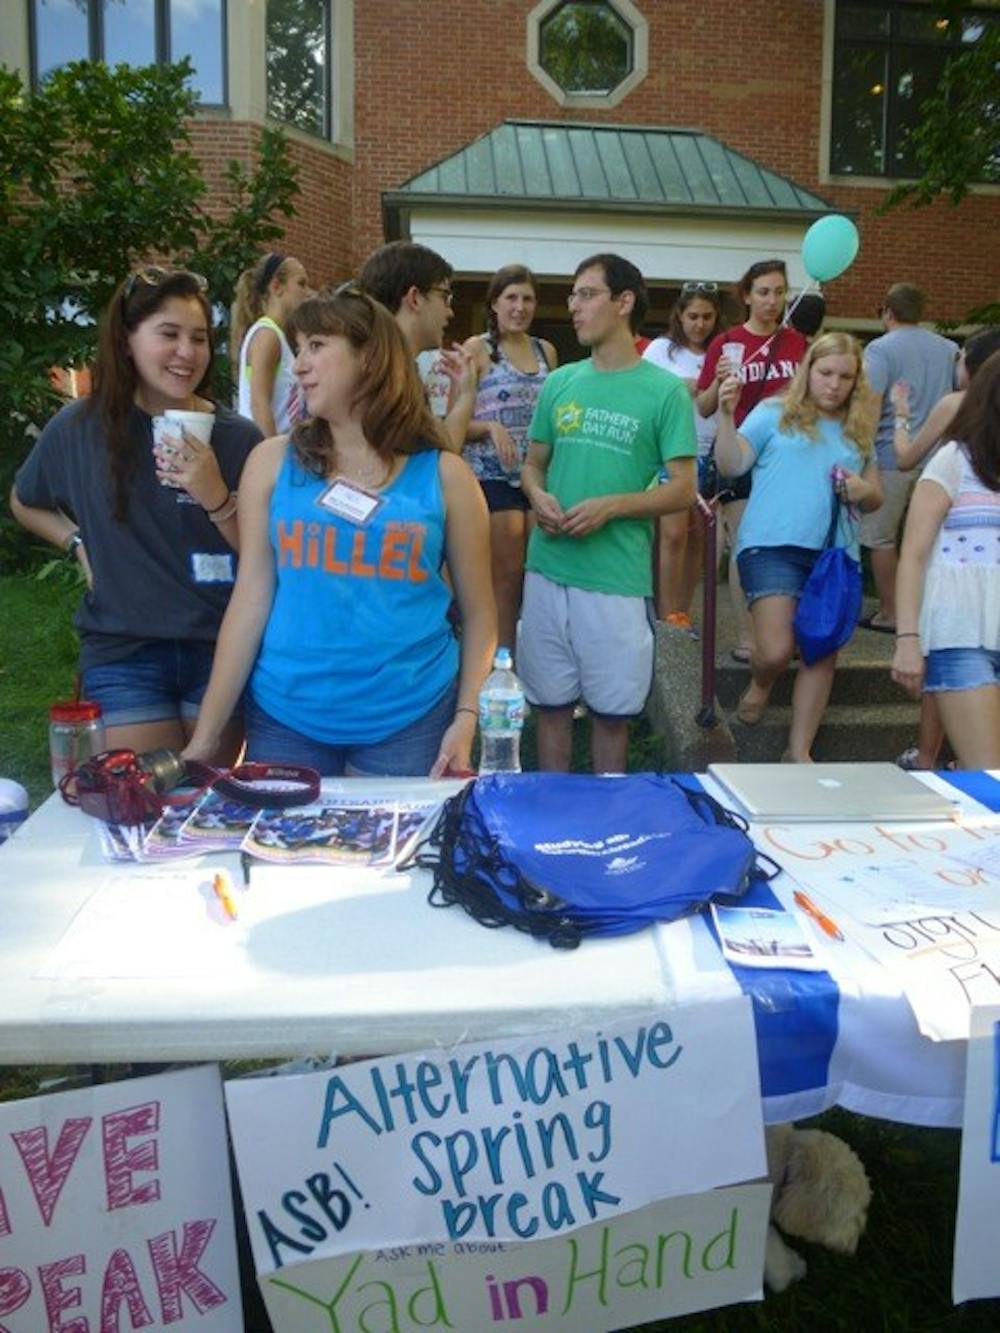 Over 20 Hillel affiliated clubs set up tables in front of the Hillel house on Sunday evening during the annual 'Welcome Back BBQ' event. 